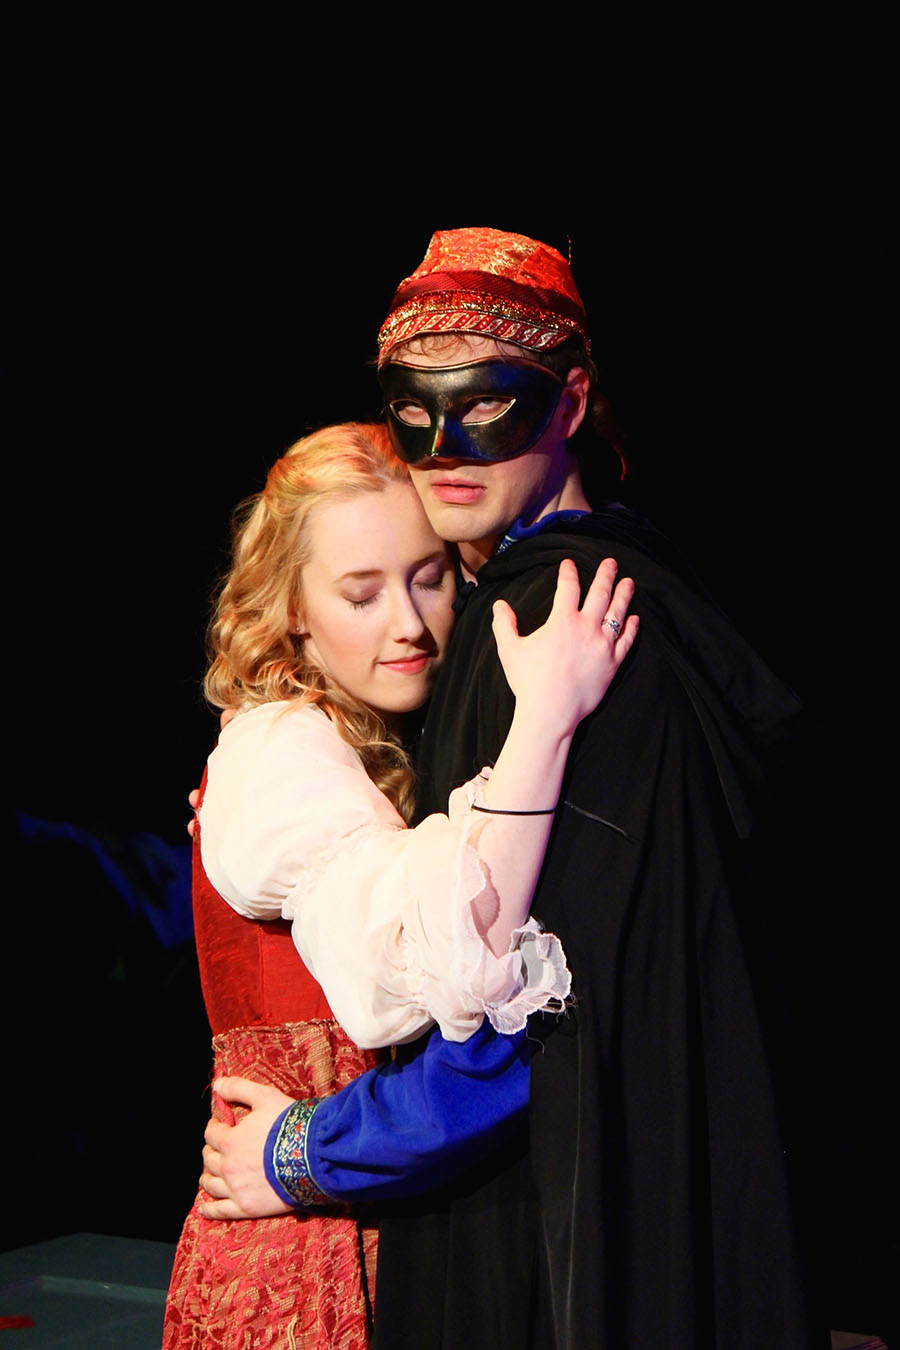 actor in mask clutching woman in dress in romantic pose